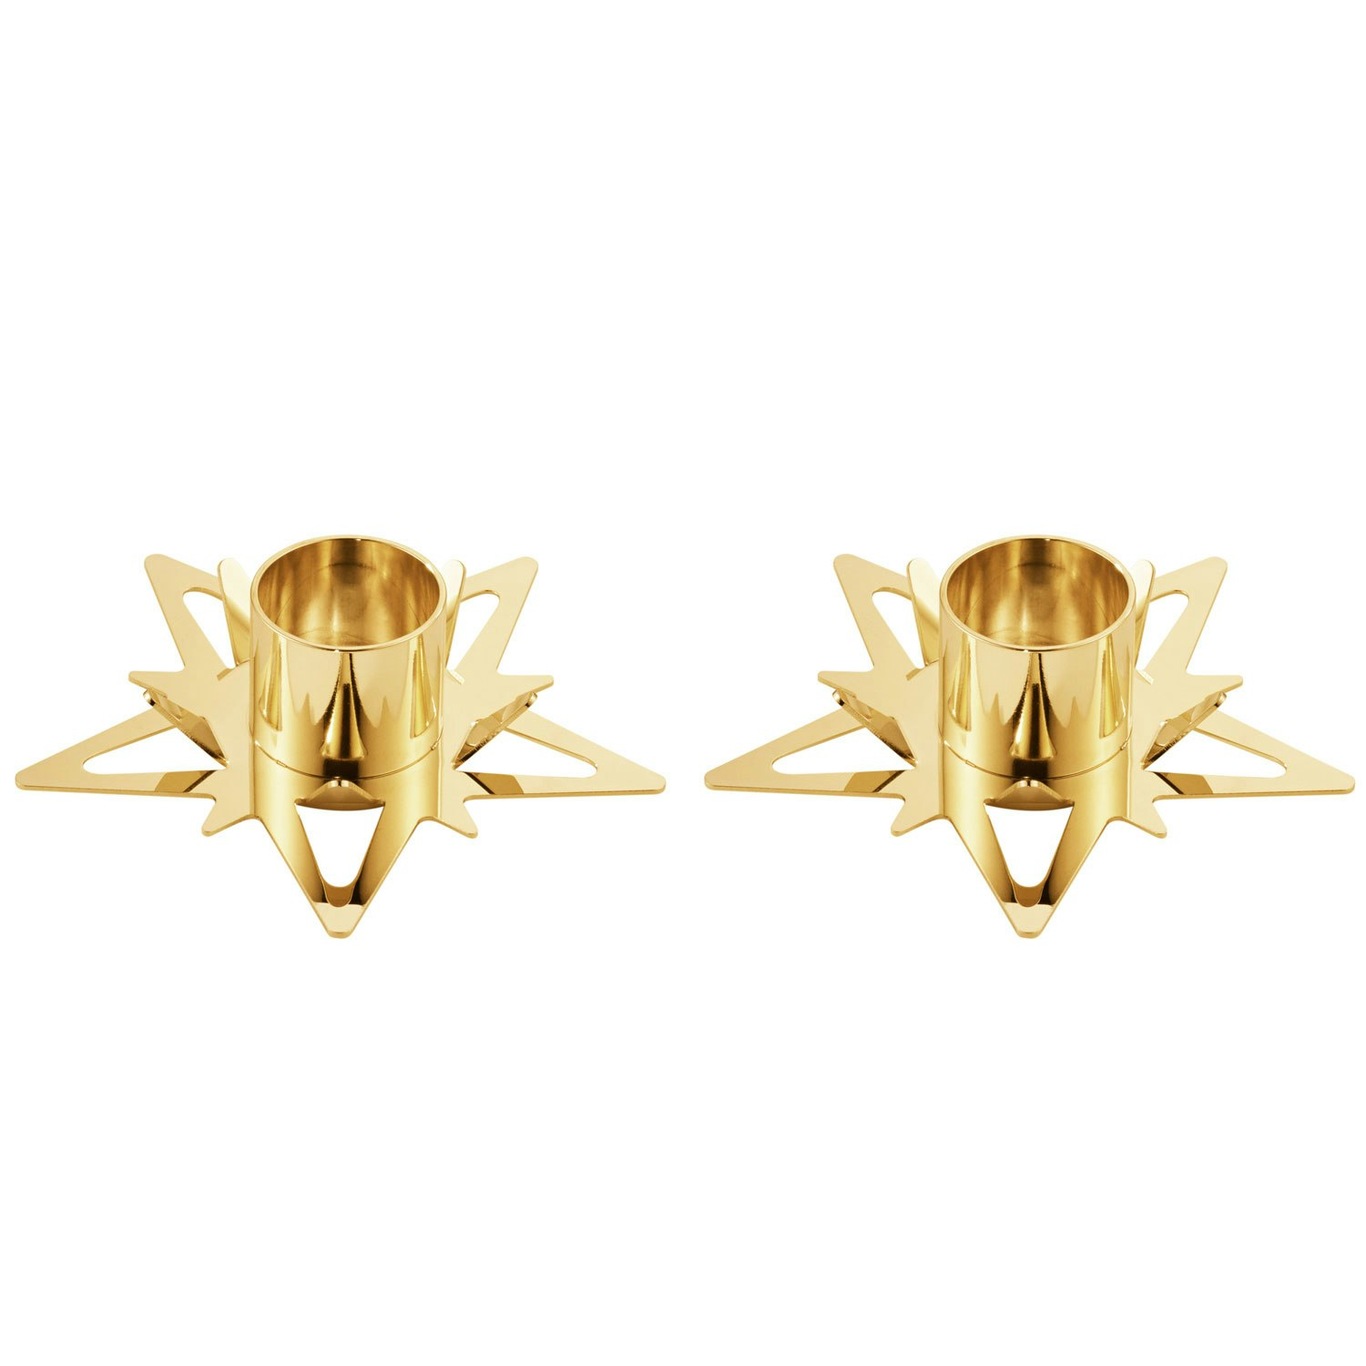 Christmas Star Candle Holders For Taper Candle 2 Pieces, Gold-Plated Brass